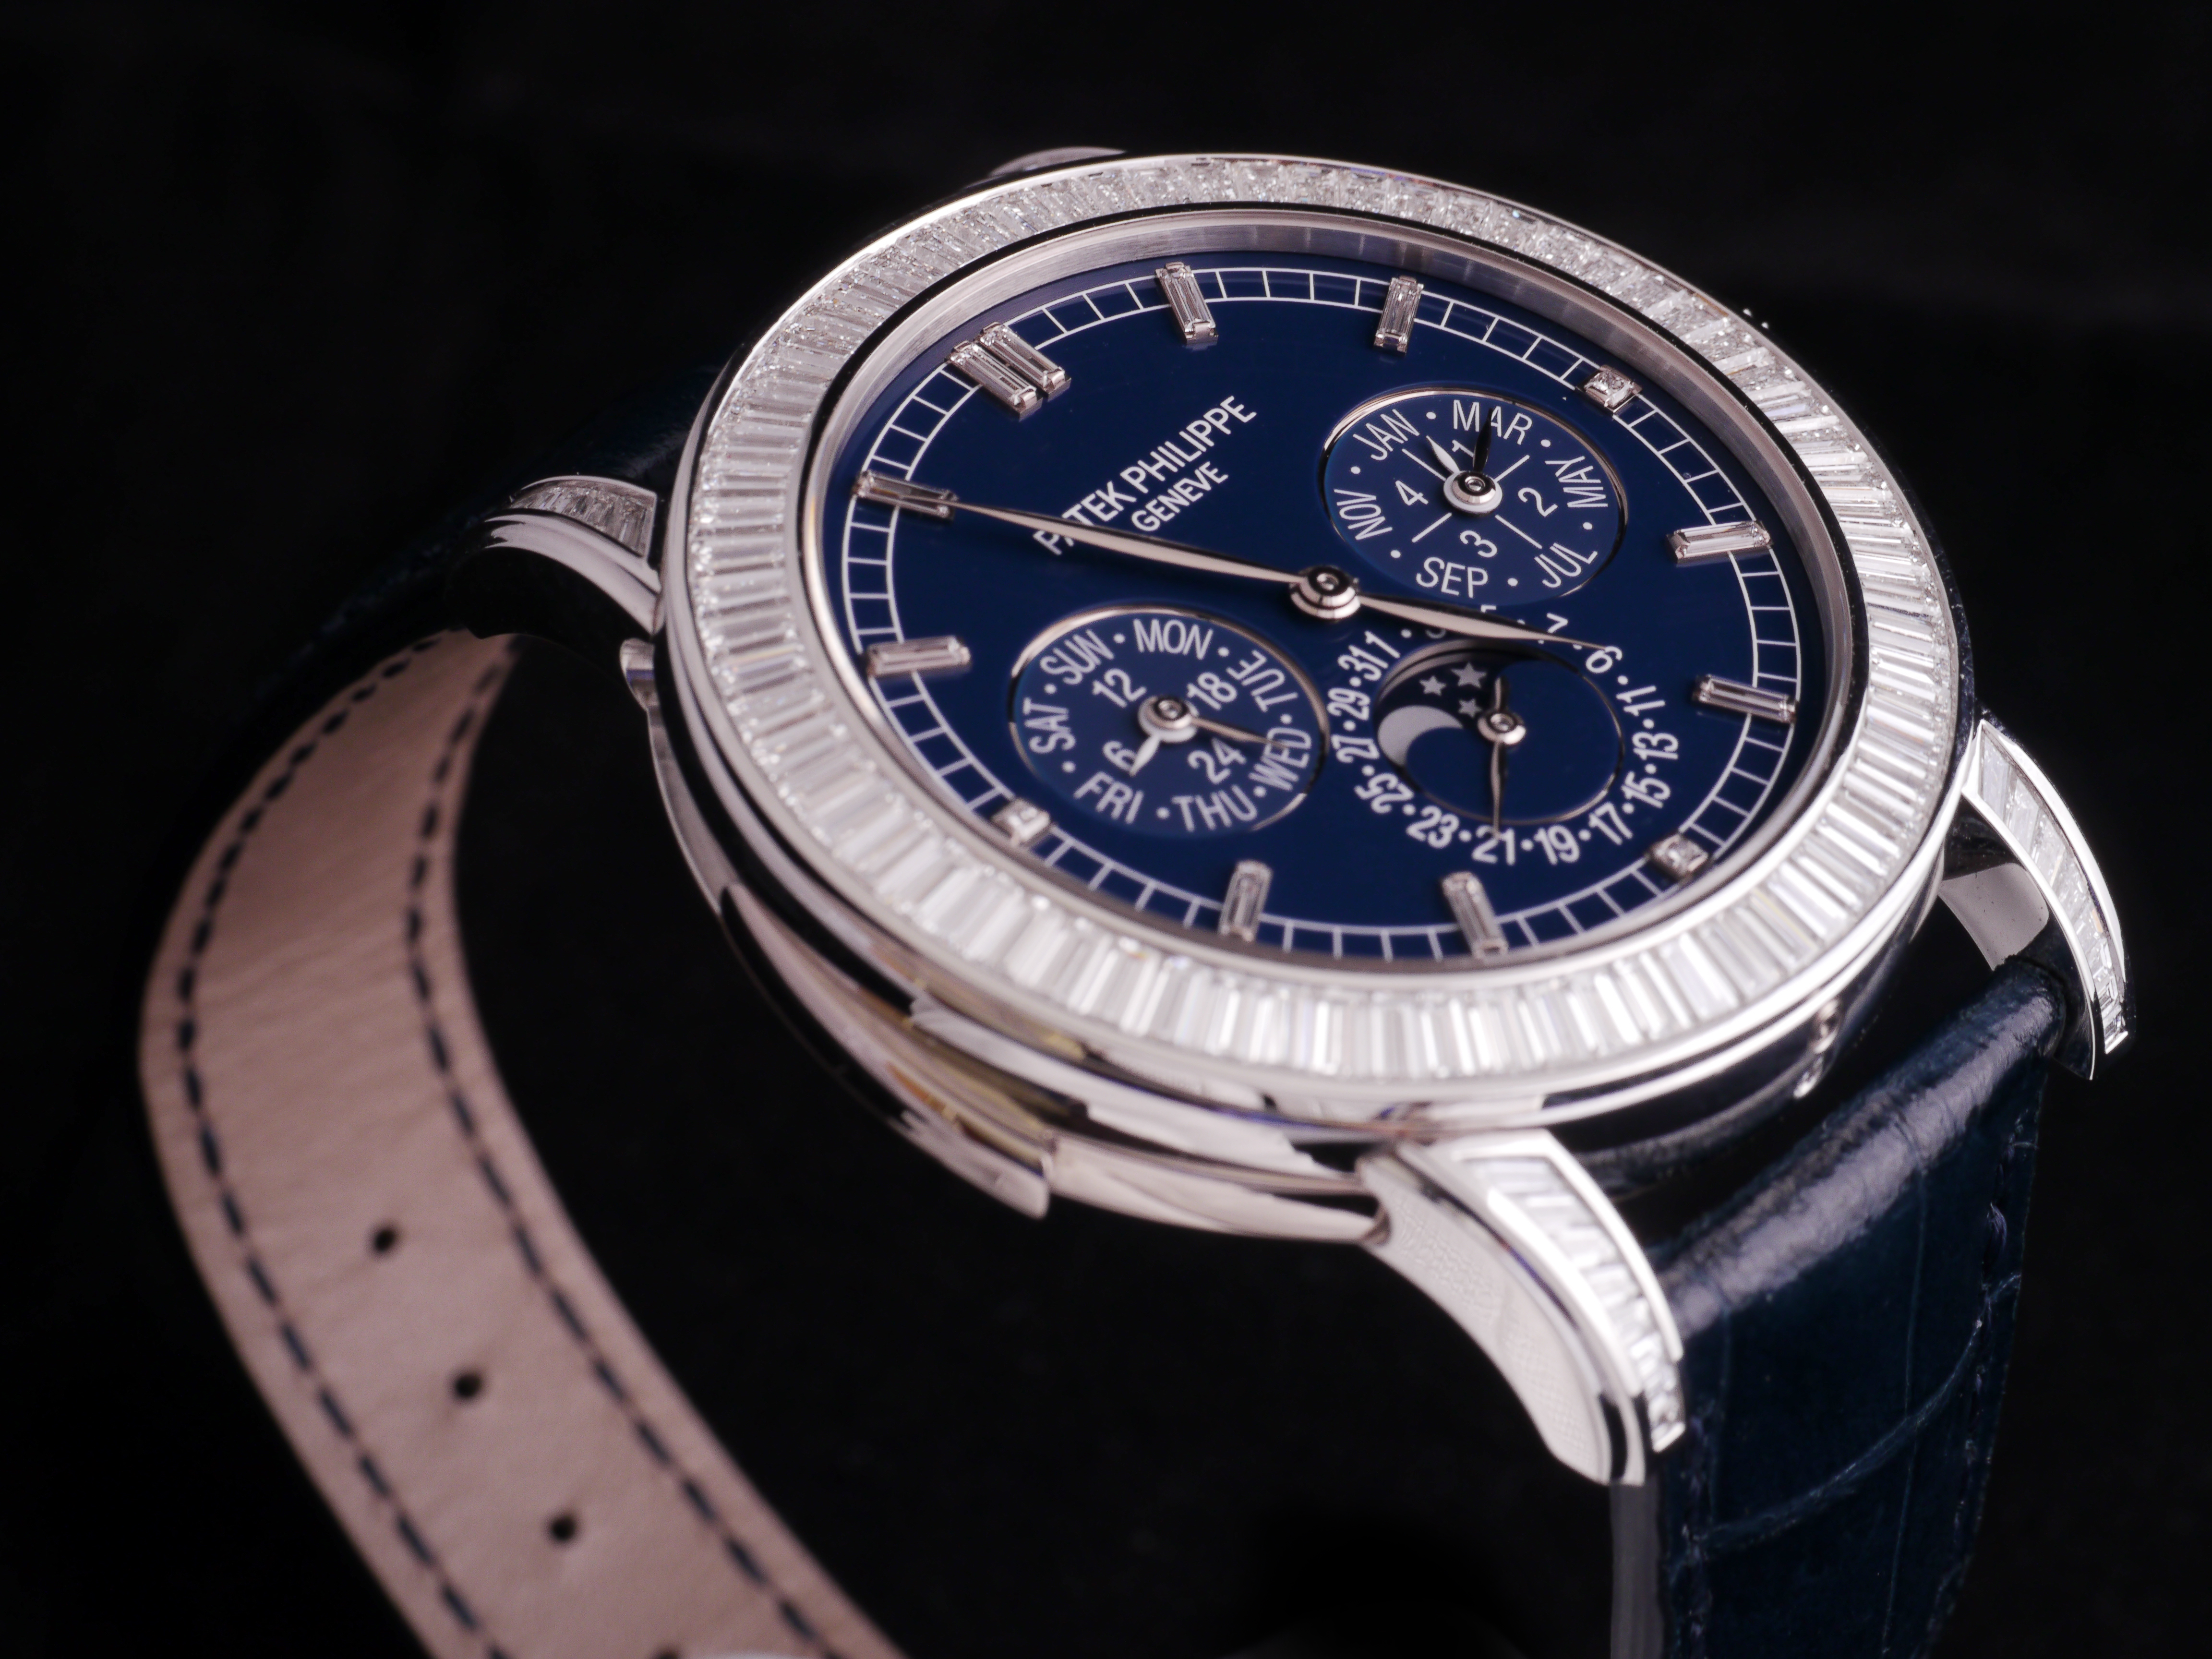 Patek Philippe reference 5073 - when technical meets aesthetic brilliance.